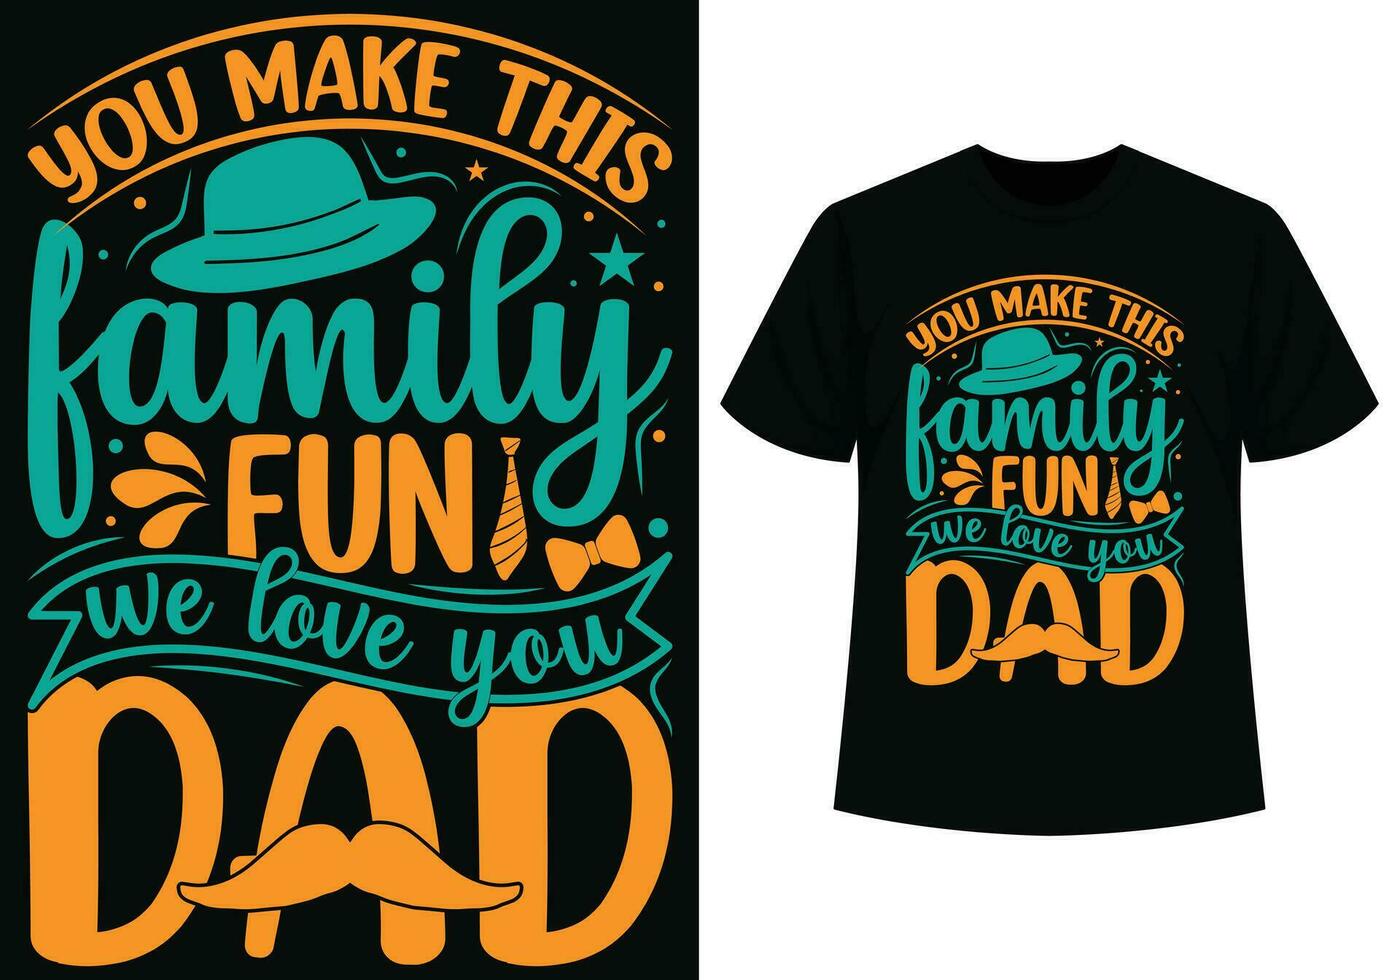 You make this family fun t-shirt design for dad day vector